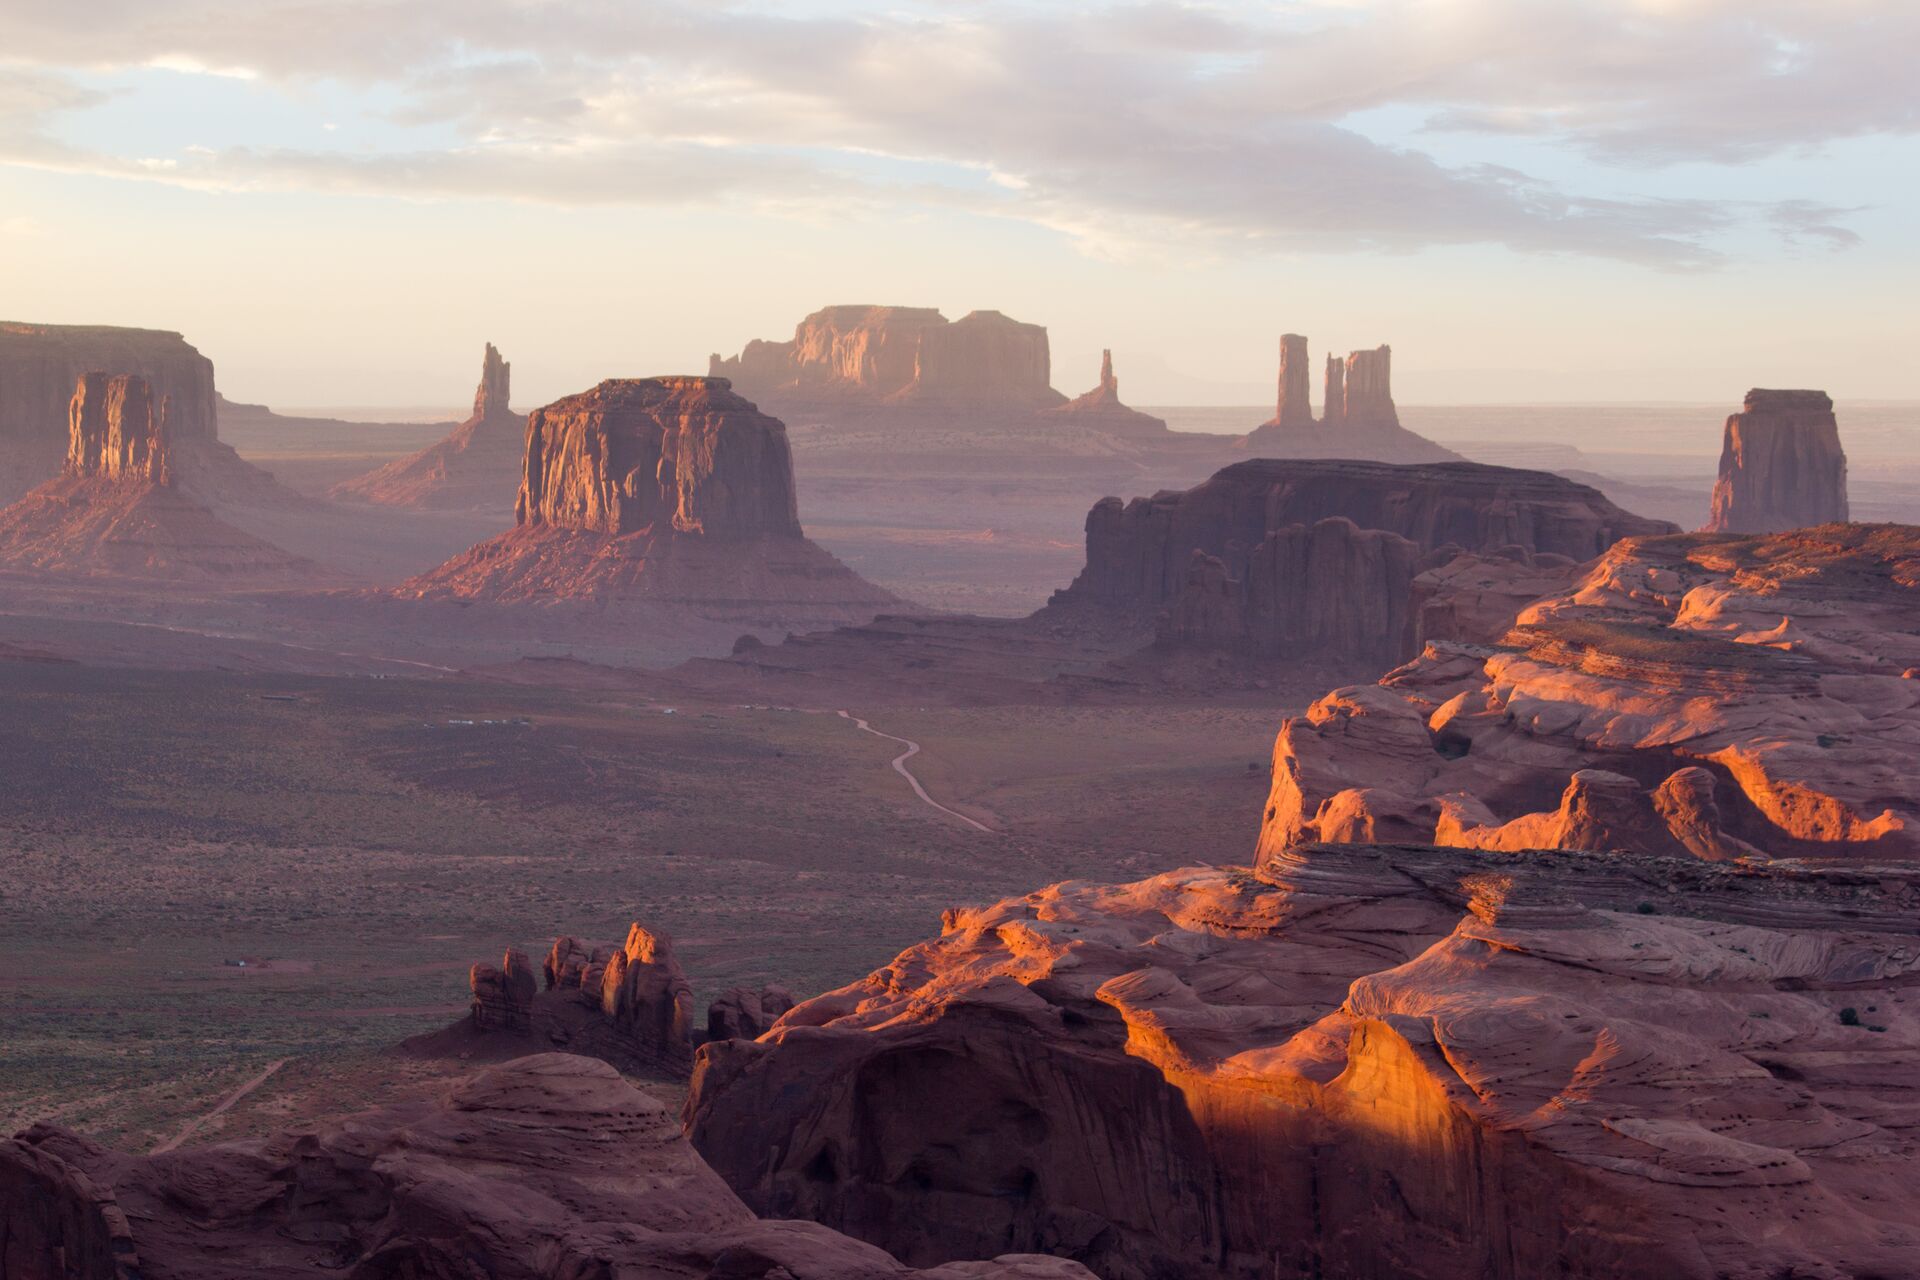 Photograph of Monument Valley, shot from a distance, with sunlight illuminating the buttes and mesas